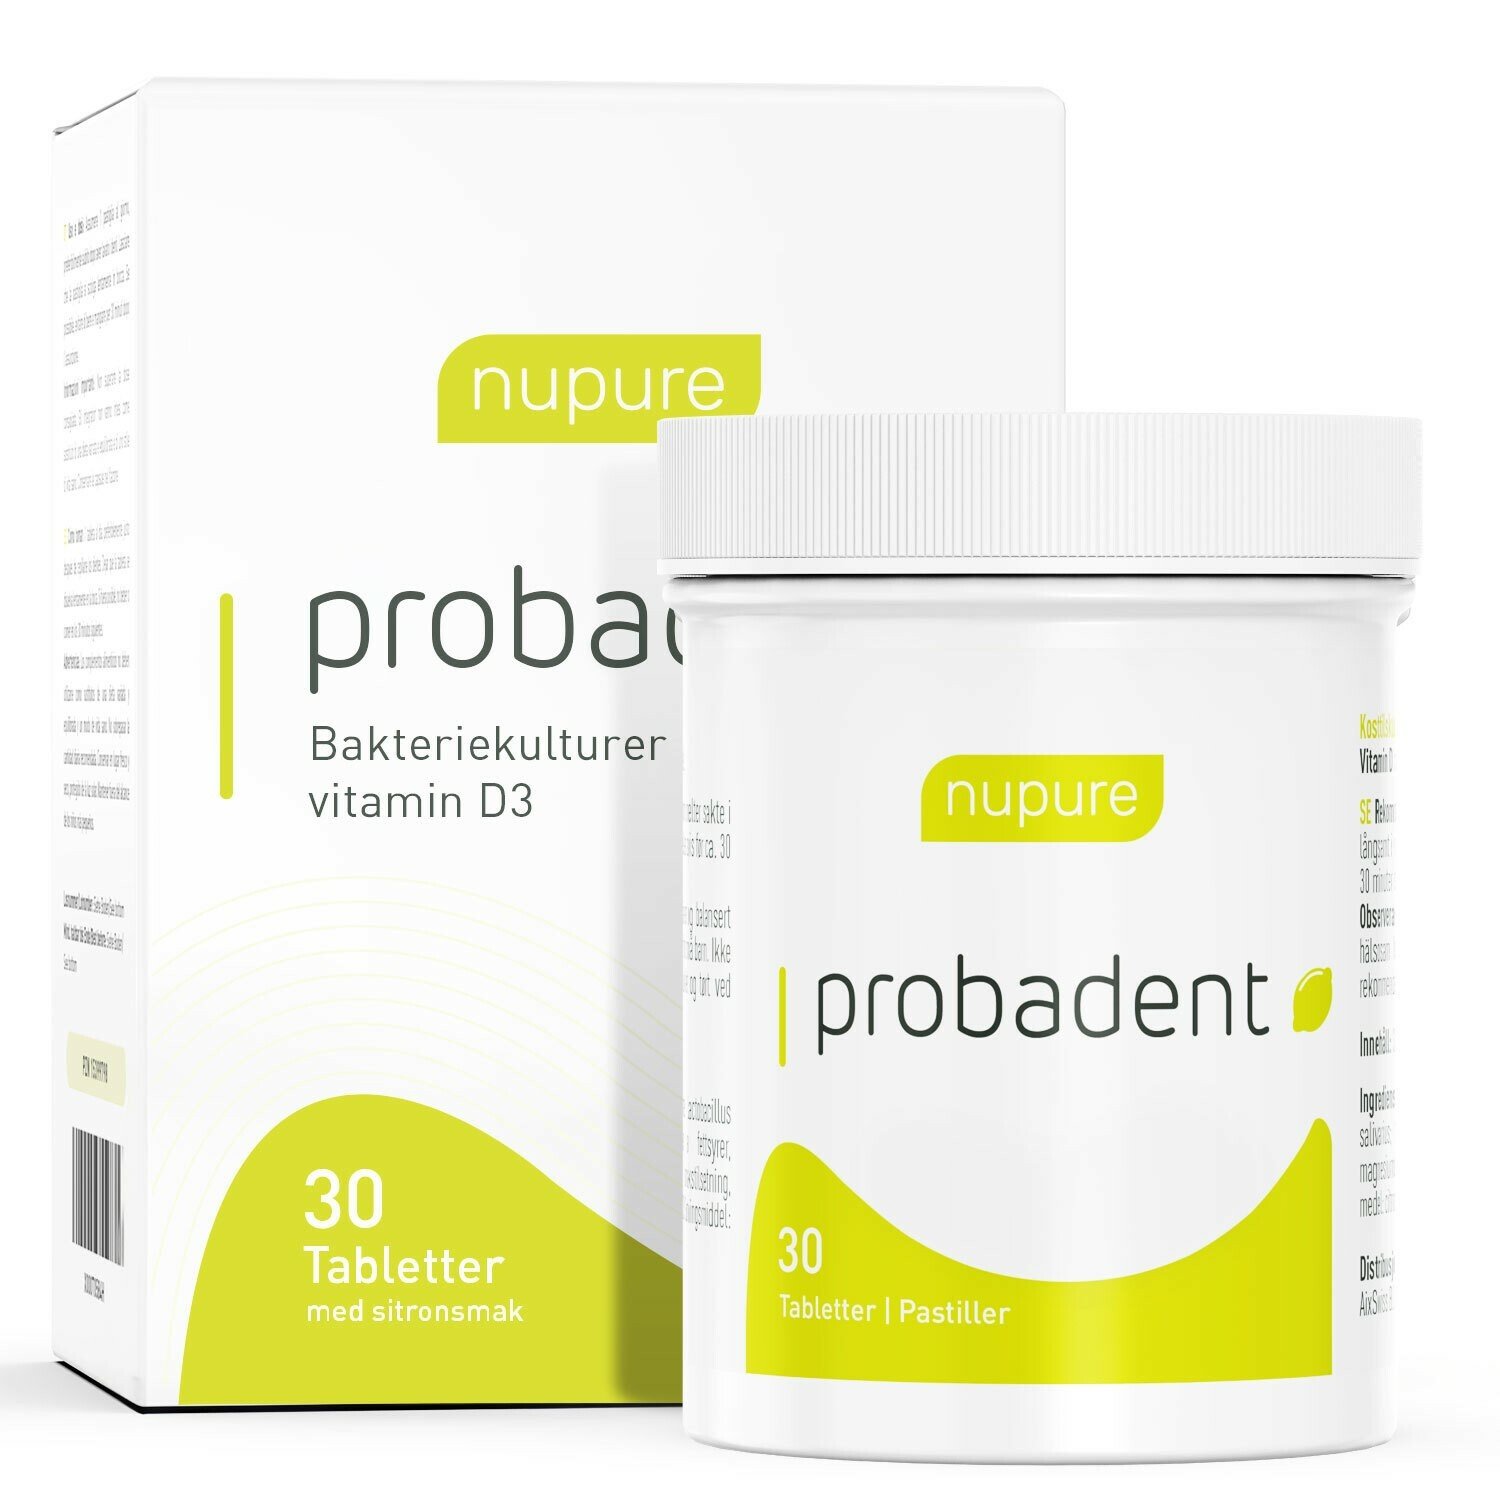 nupure probadent 30 tabletter